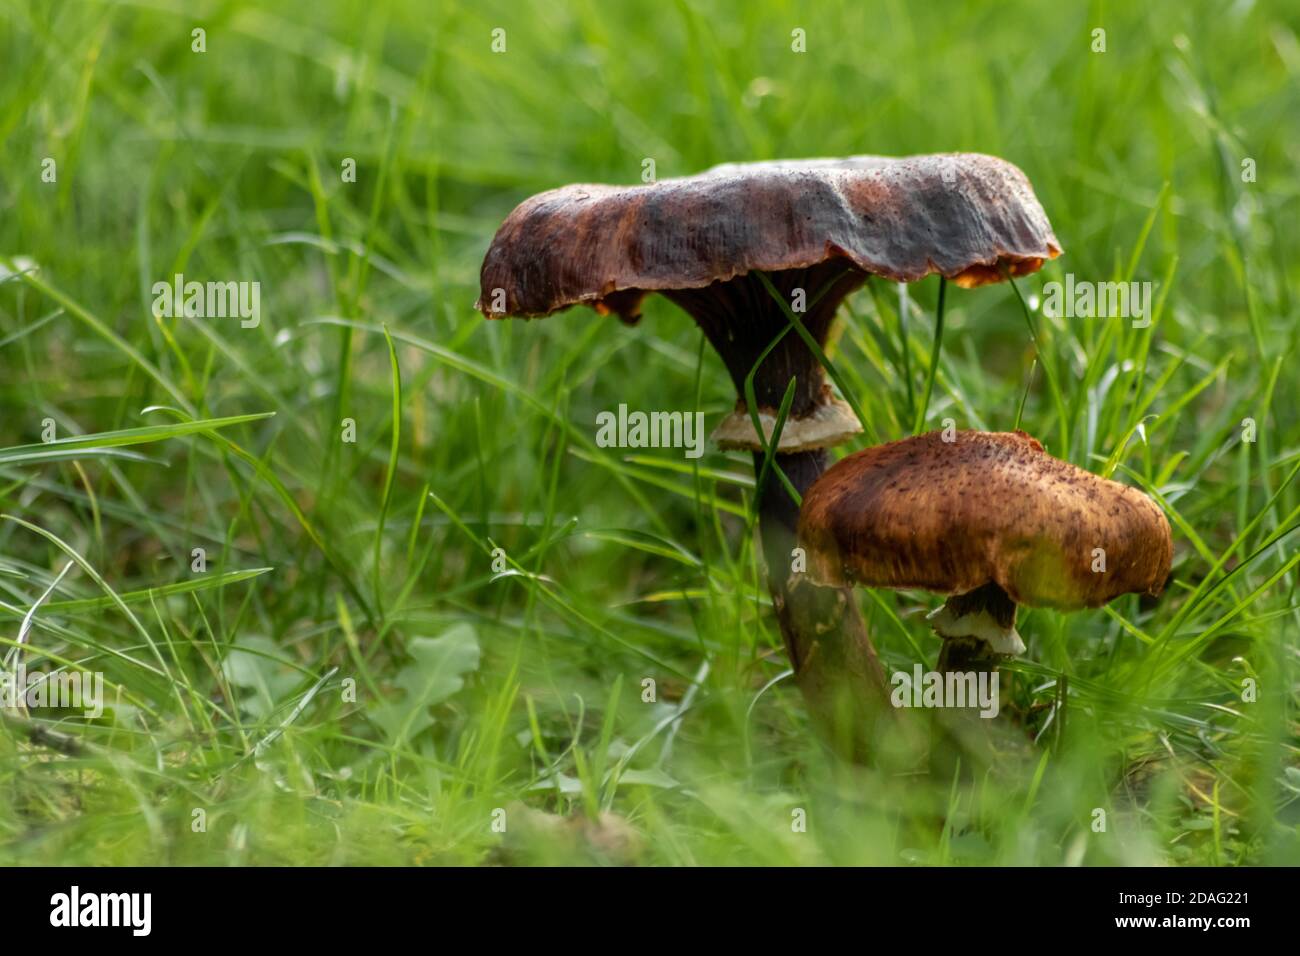 Big mushrooms in a forest found on mushrooming tour in autumn with brown foliage in backlight on the ground in mushroom season as delicious Stock Photo